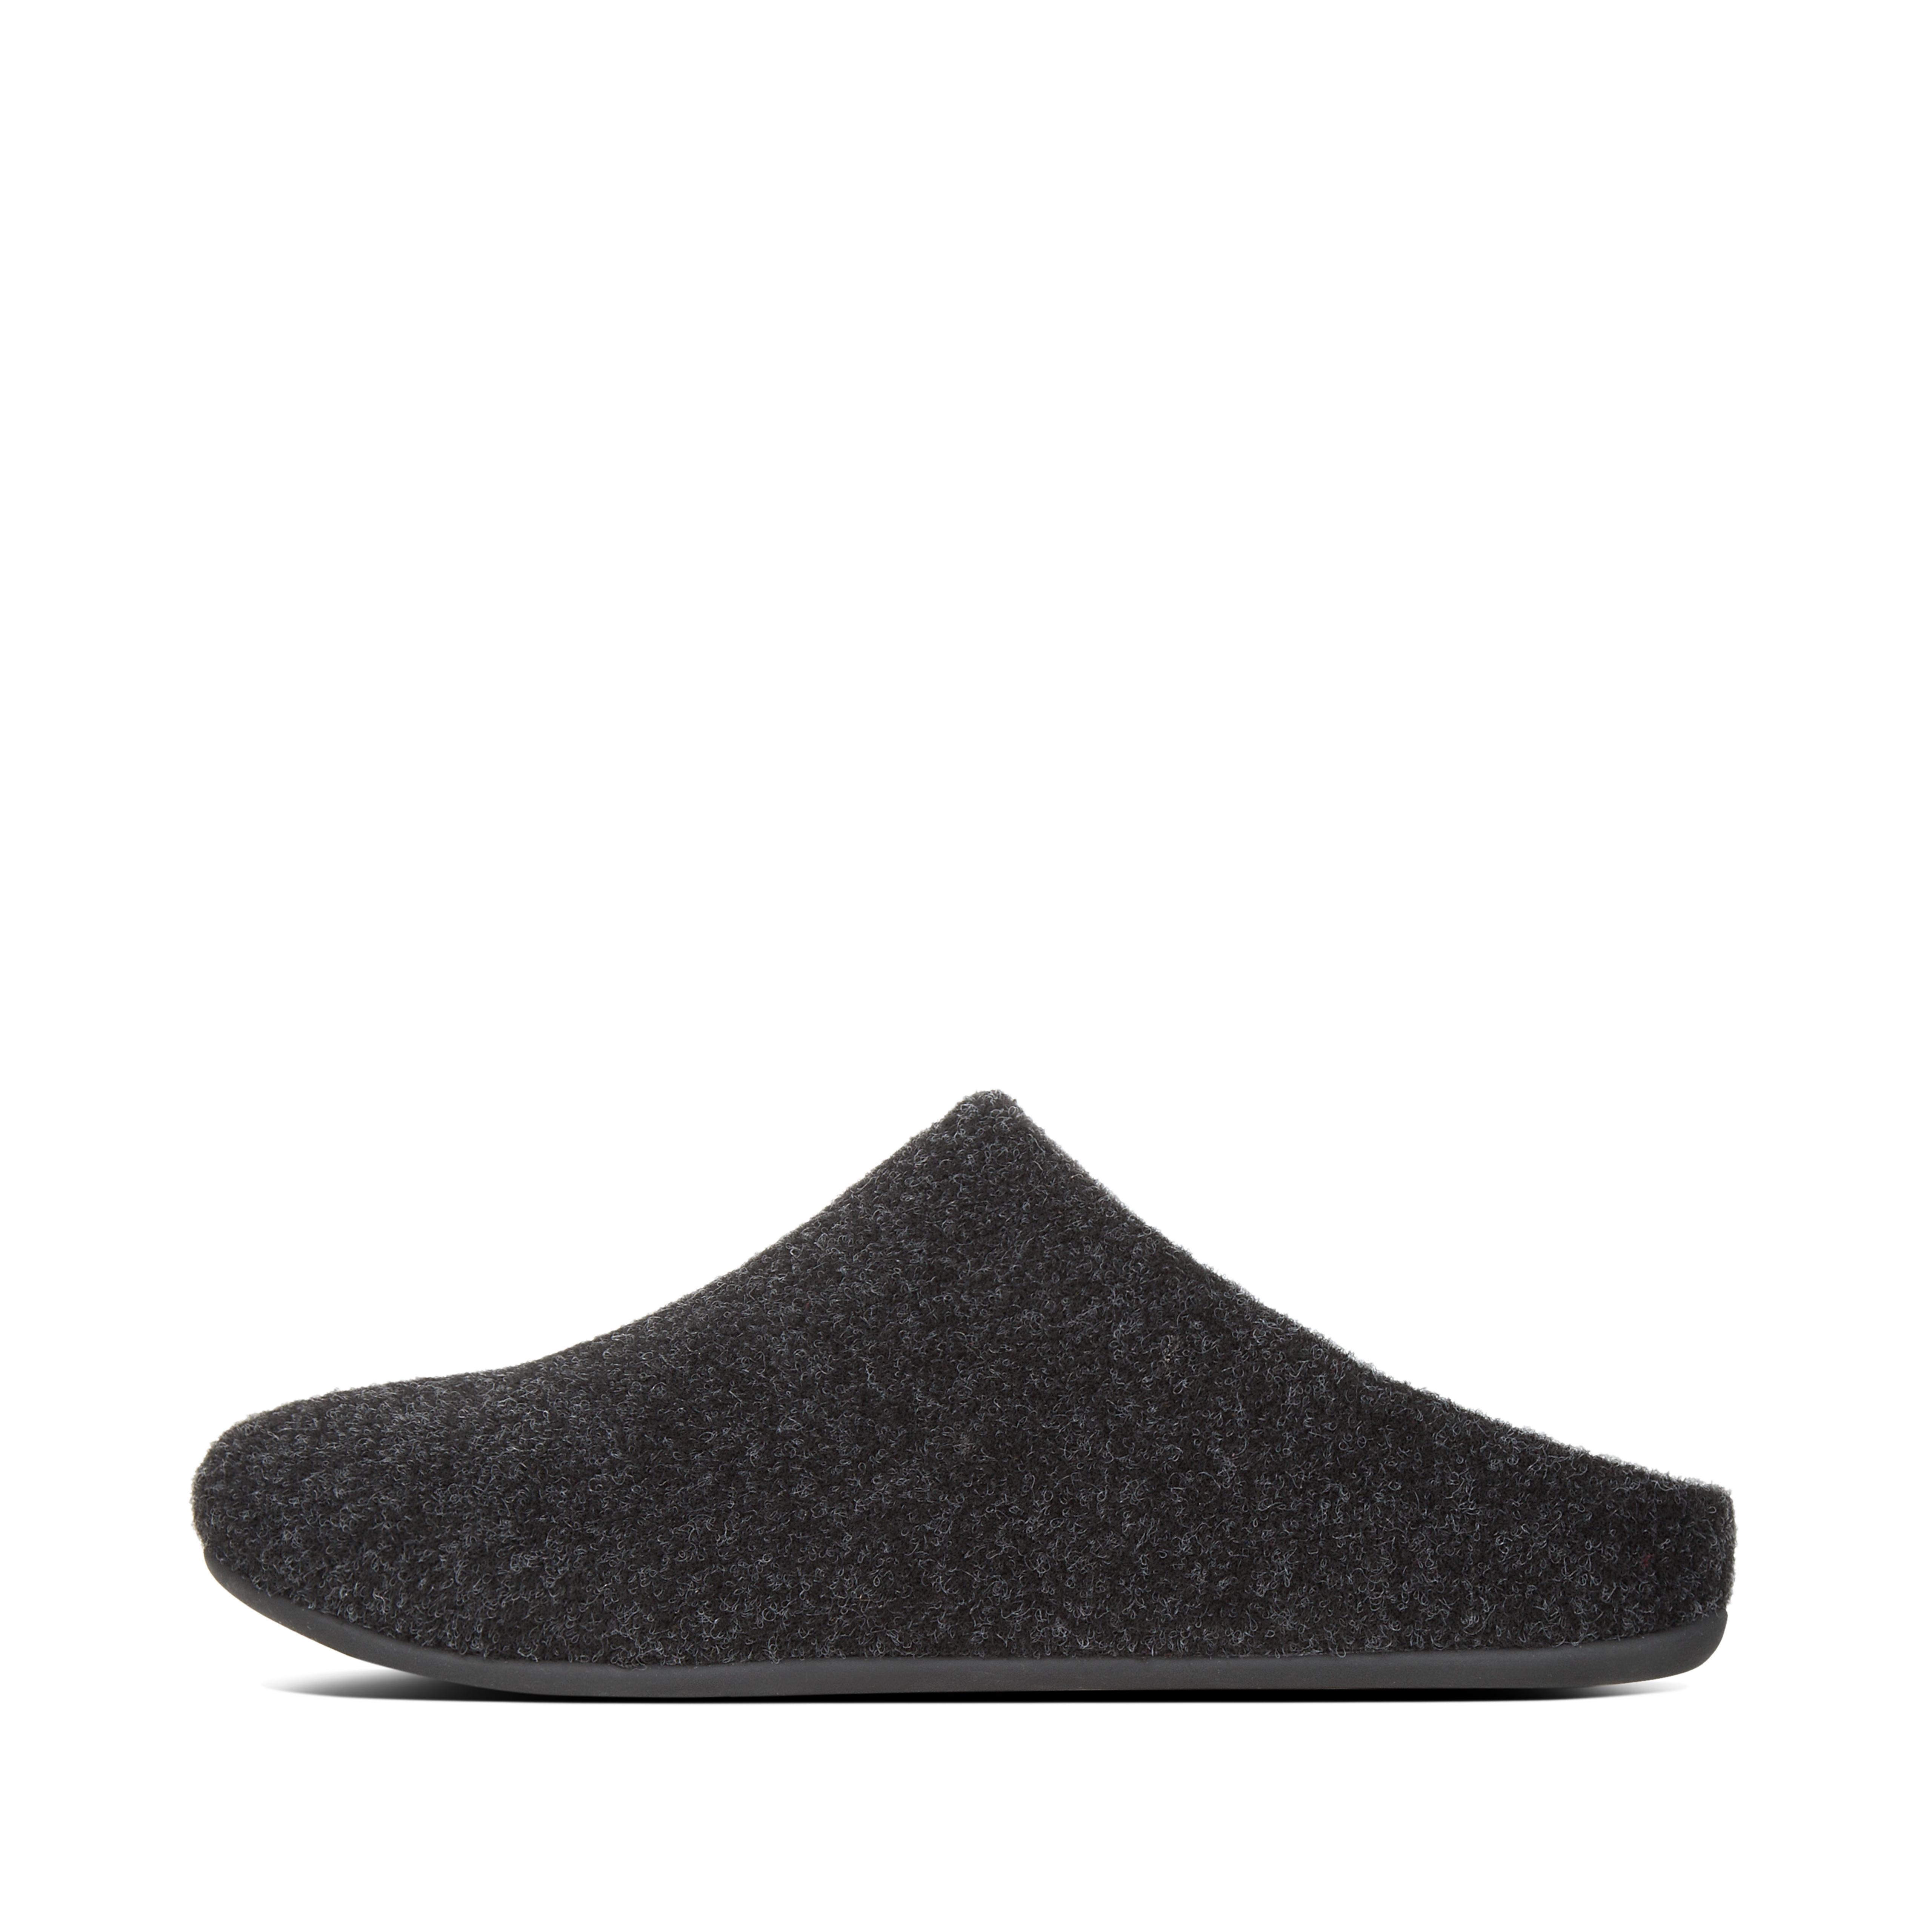 fitflop slippers uk